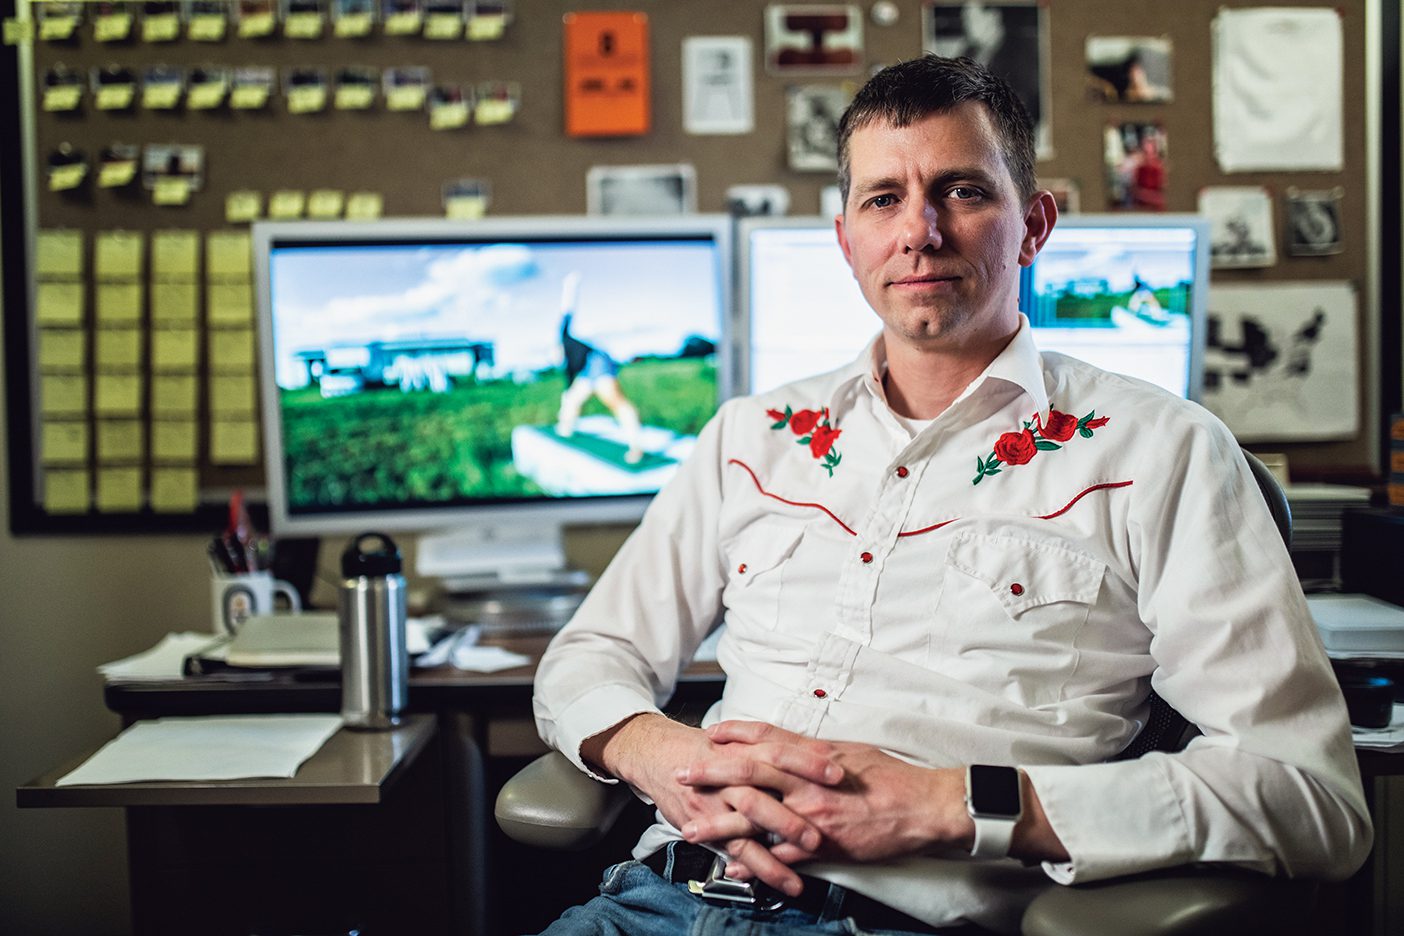 Brad Barber, in an embroidered shirt, sits in his office with footage of States of America on the monitor in the background.